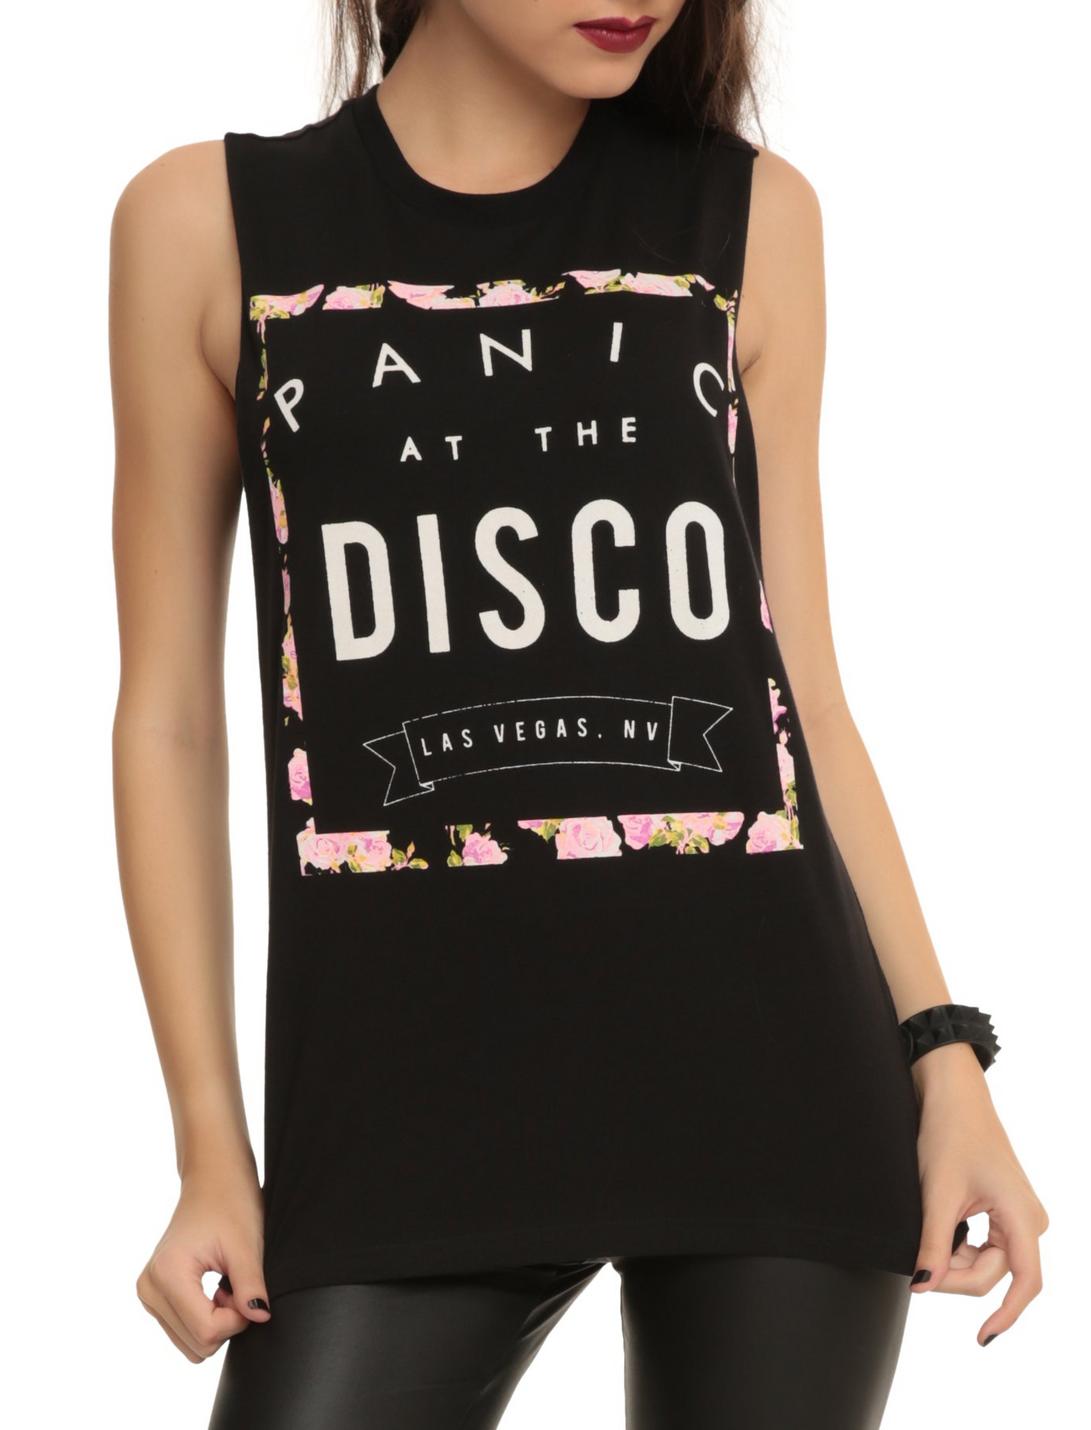 Panic! At The Disco Floral Muscle Girls Top, BLACK, hi-res